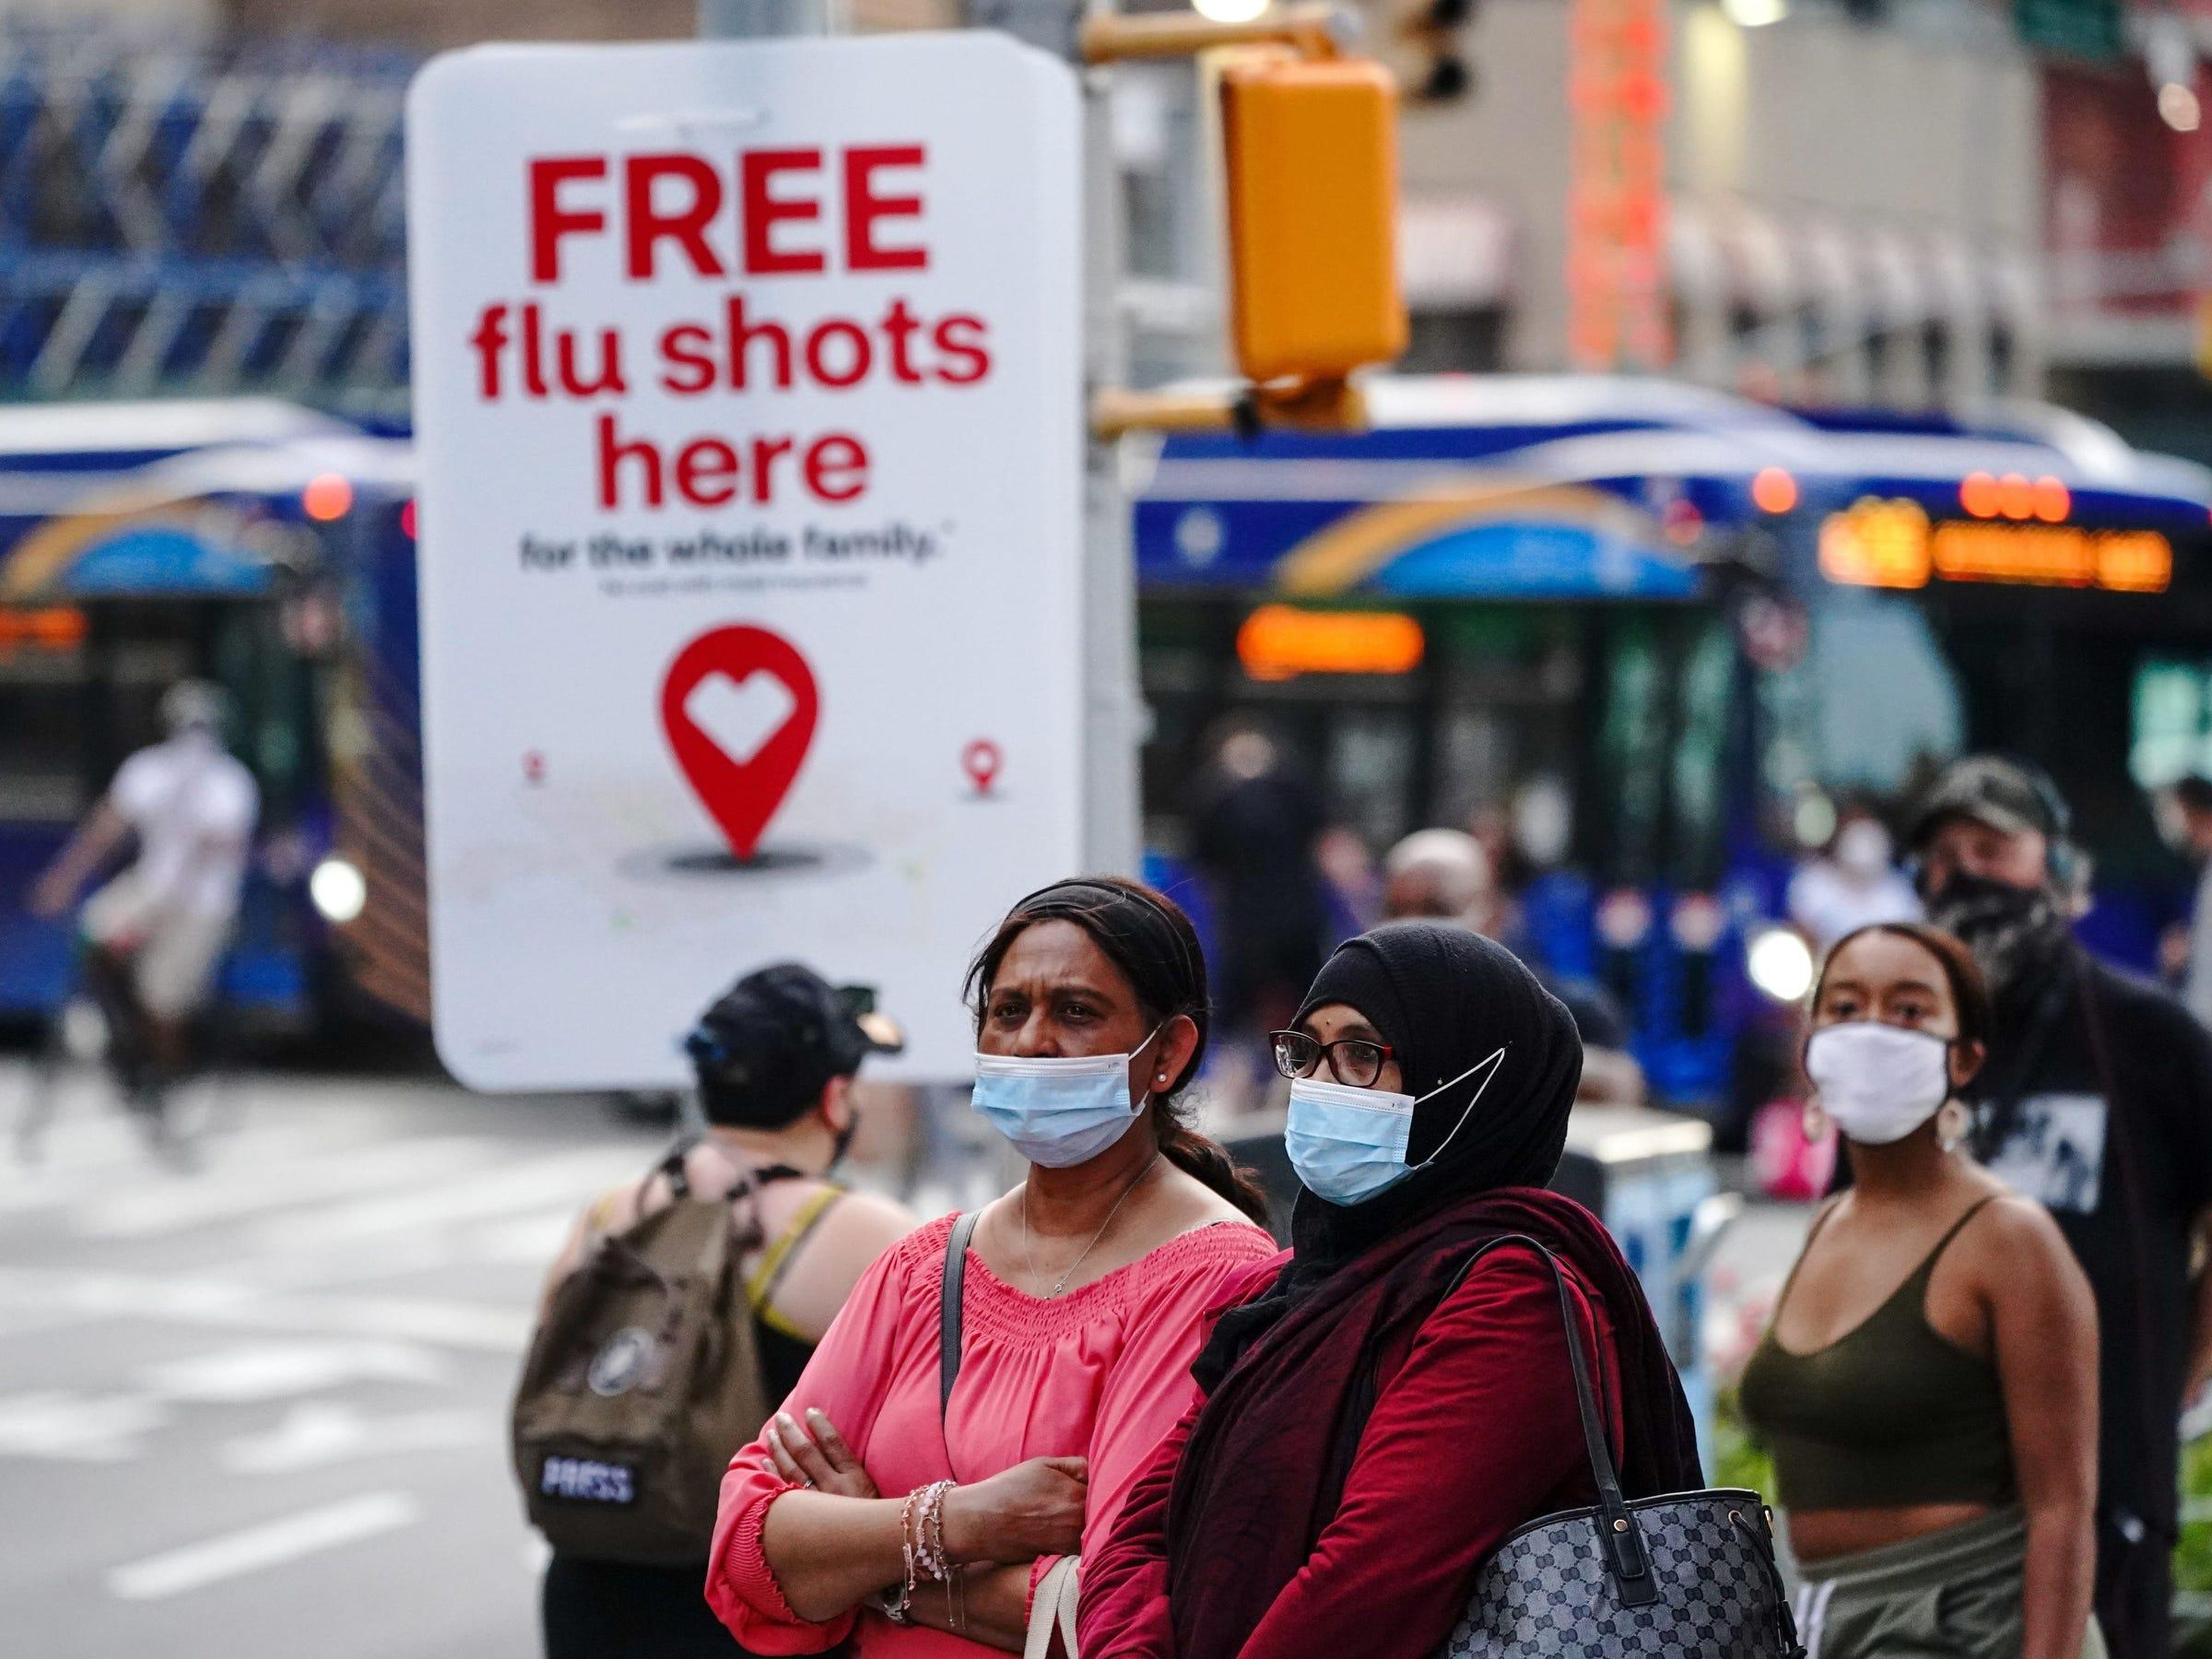 Getting a flu shot could reduce your risk of getting COVID-19, preliminary research suggests